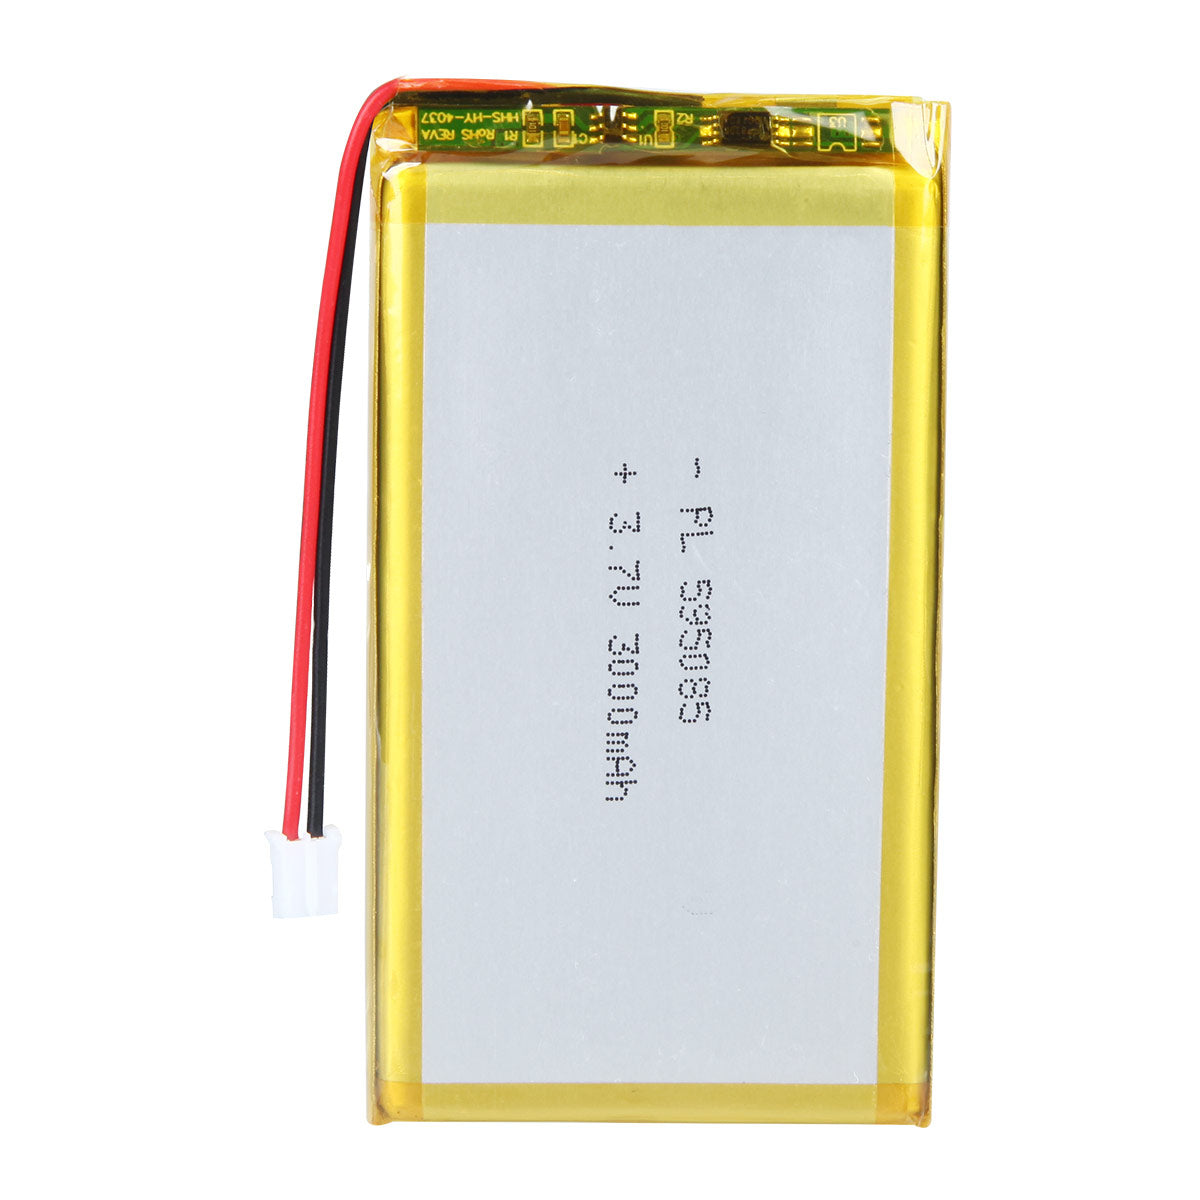 YDL 3.7V 3000mAh 595085 Rechargeable Lithium Polymer Battery